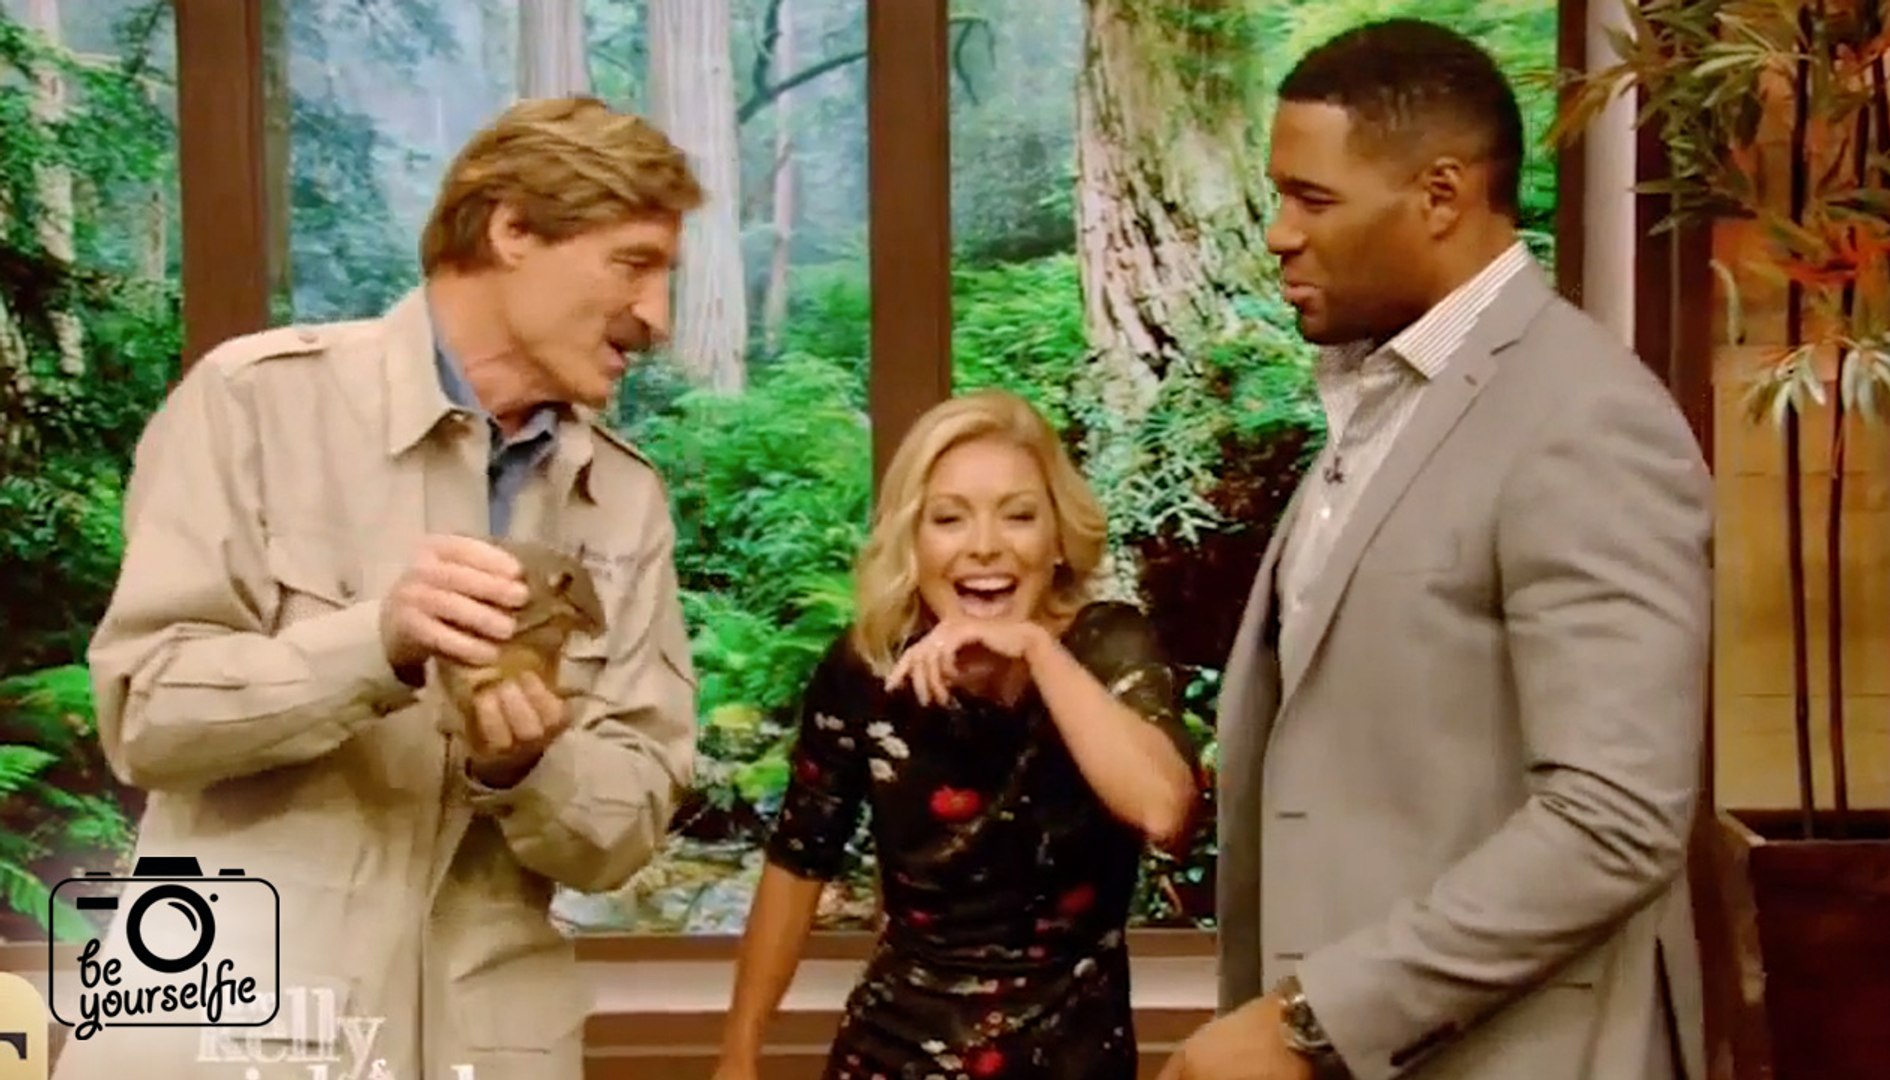 Kelly Ripa Jokes About Her Contract LIVE On Air with Michael Strahan! (Be Yourselfie)